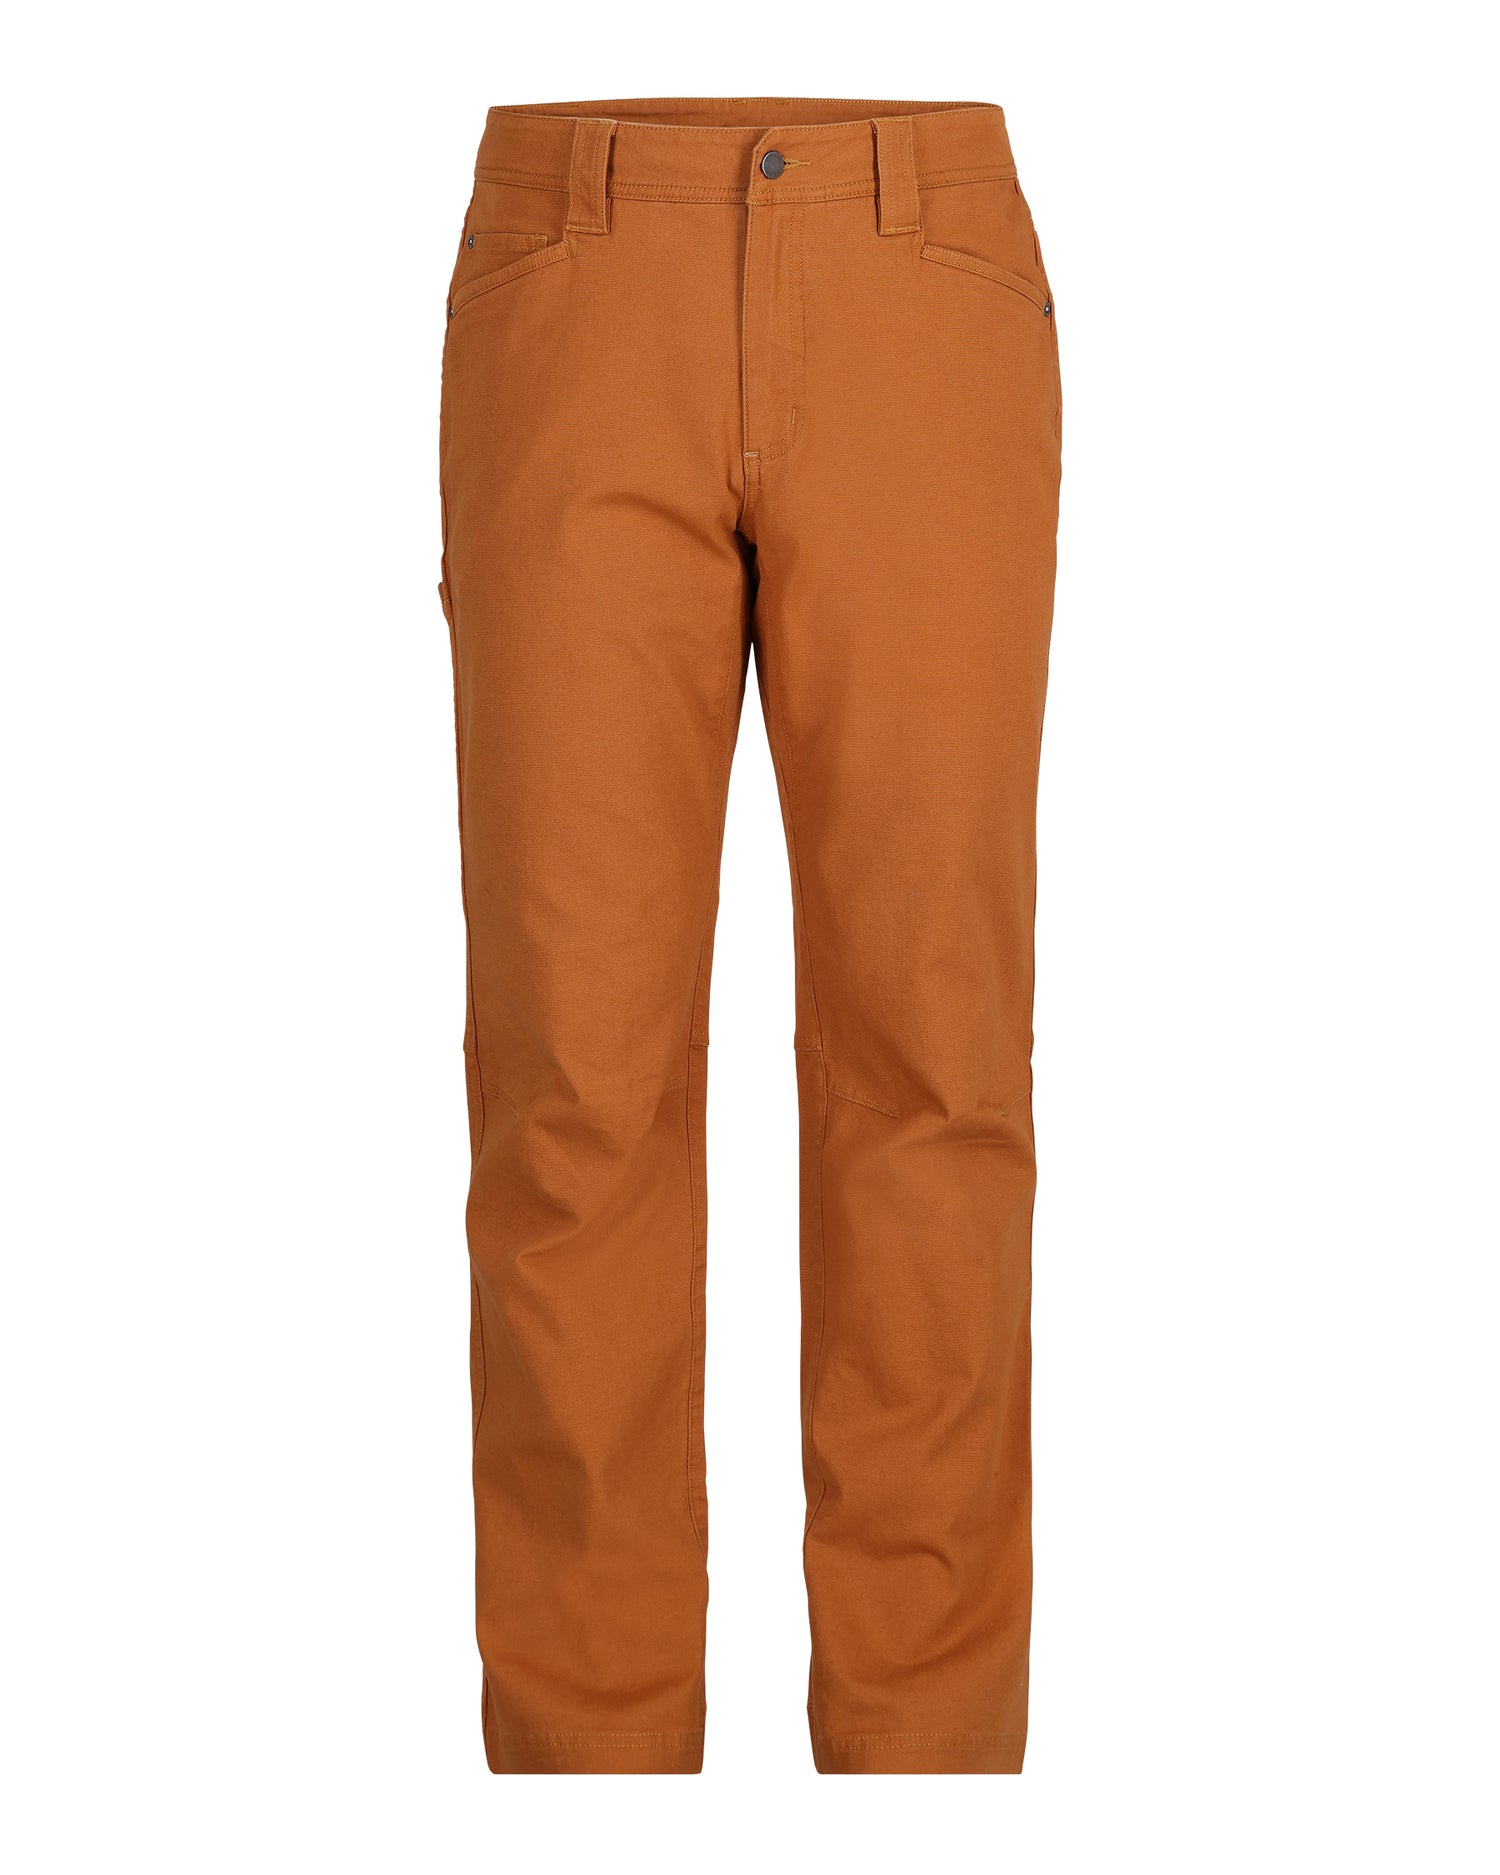 Cargo Ripstop Trousers, Bronson Protective Clothing, ripstop trousers